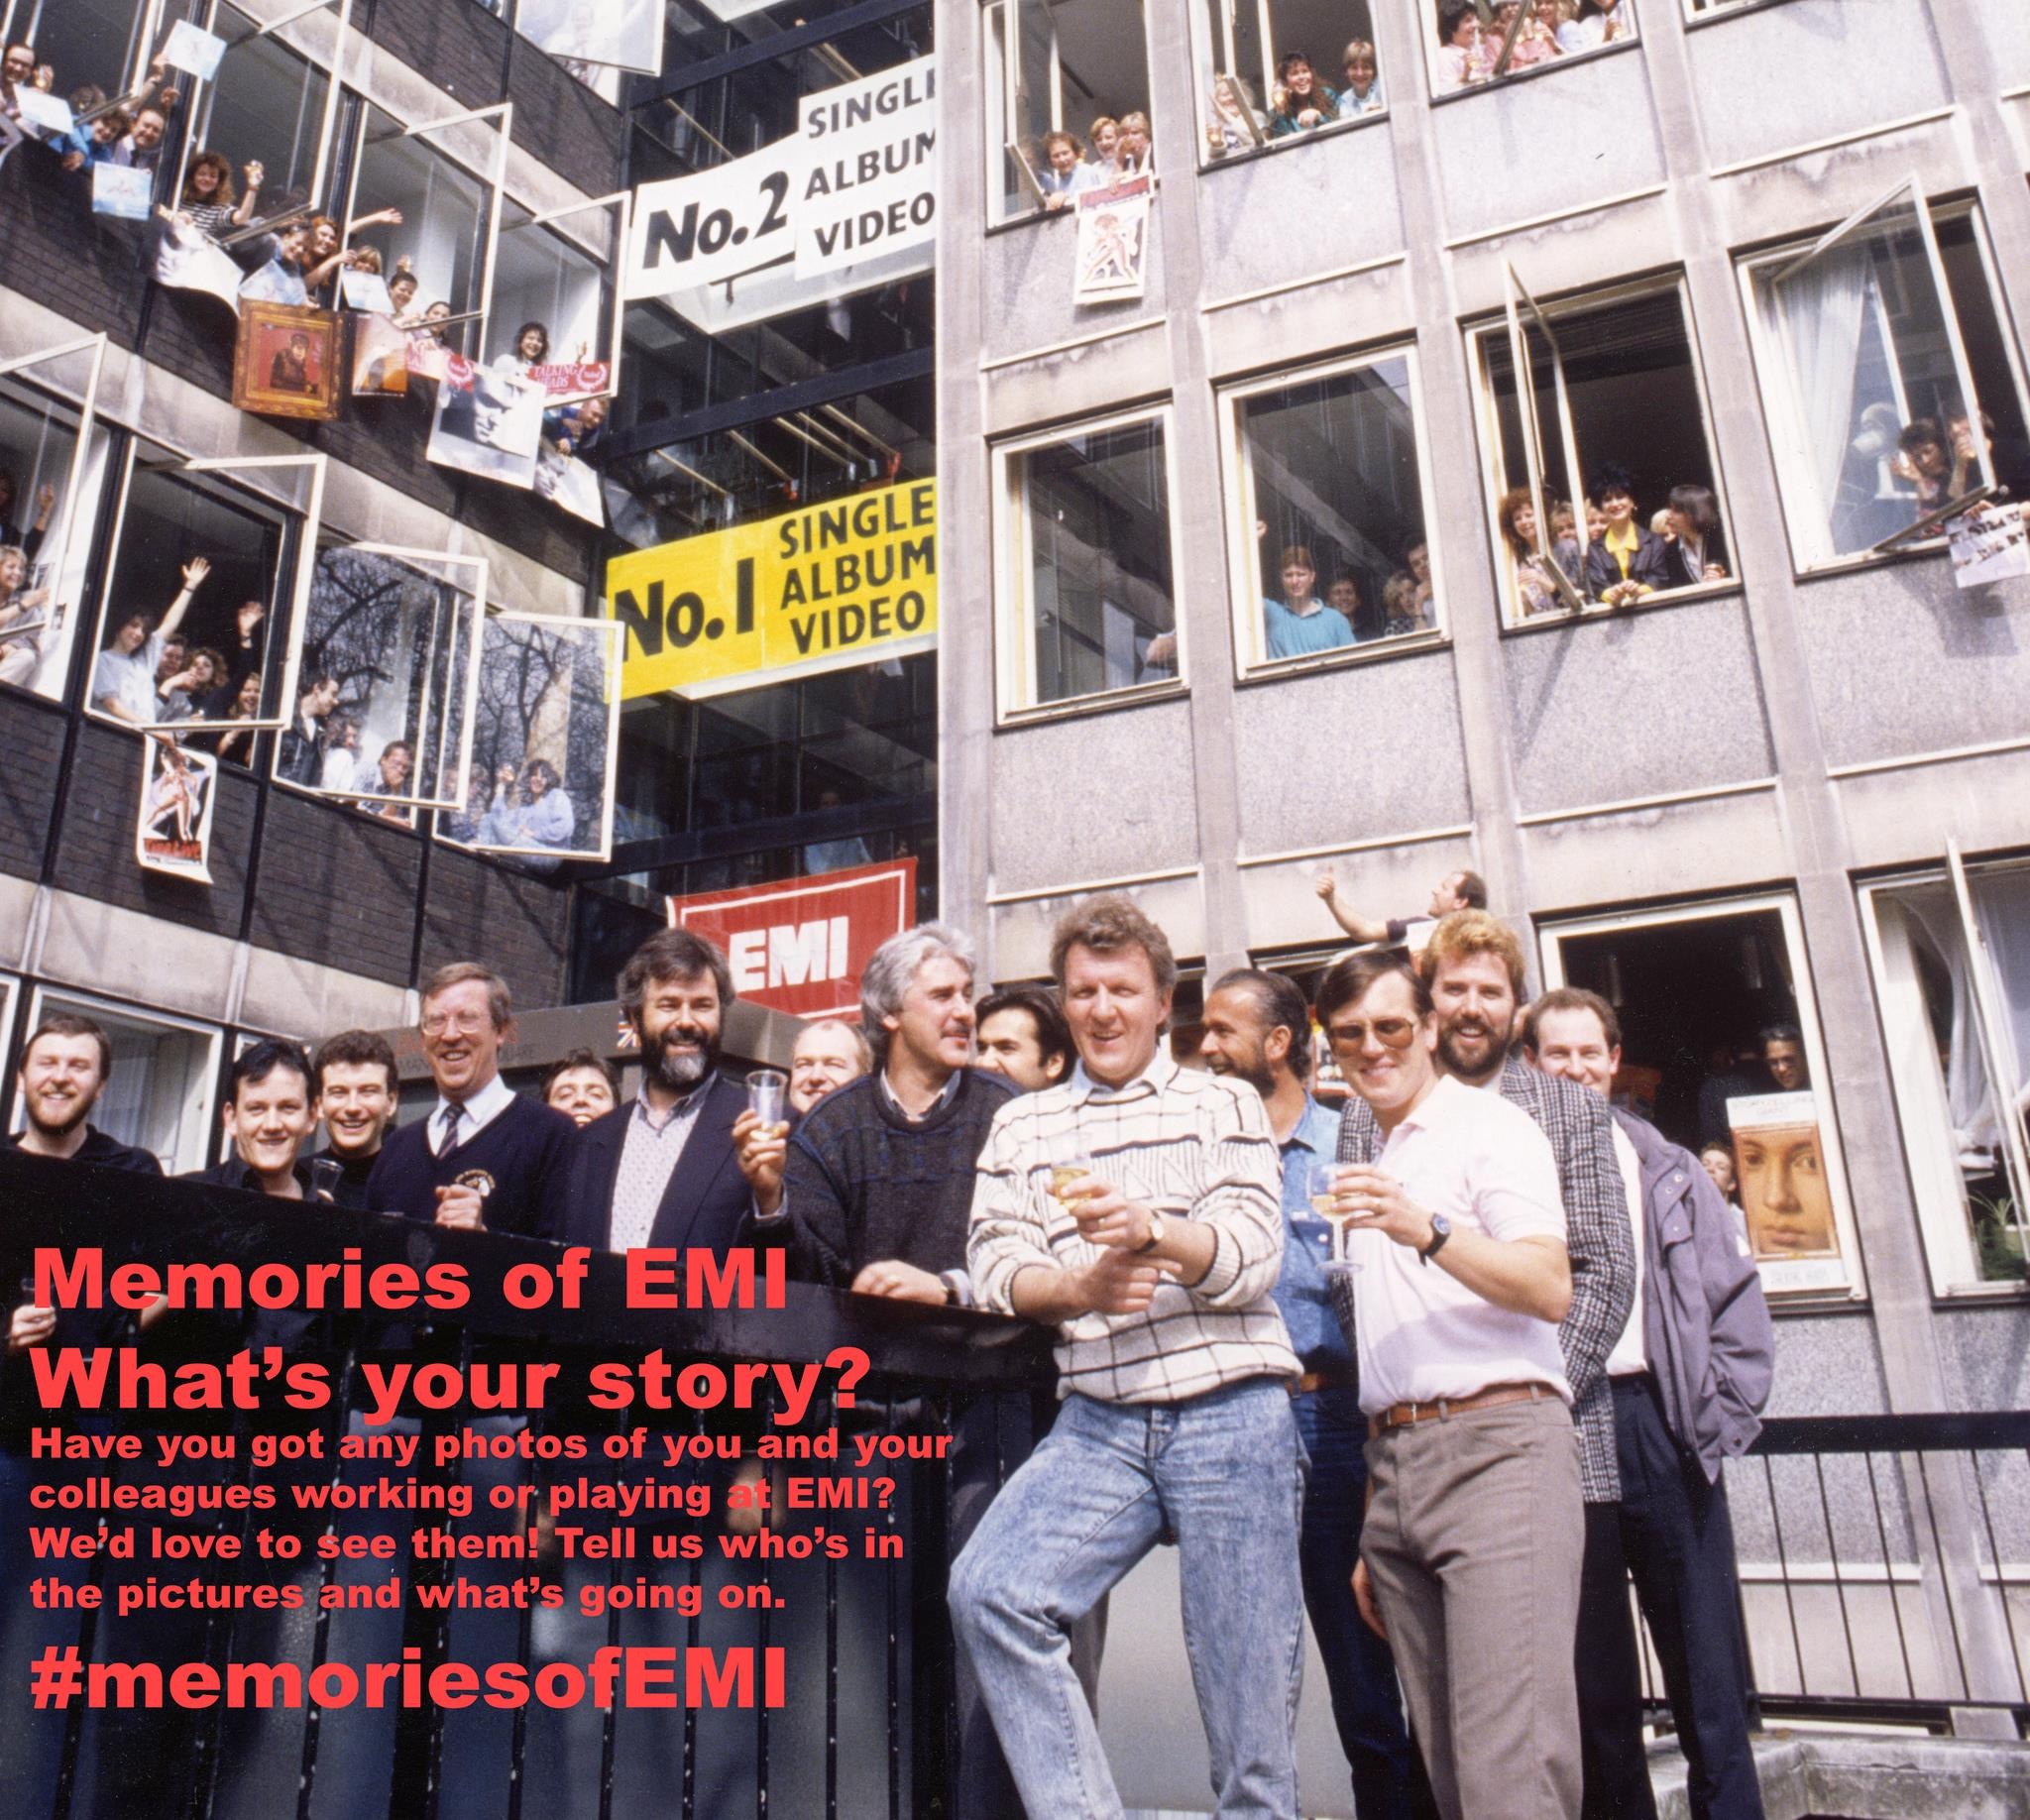 EMI Records celebrating No. 1 Single, No.1 Album and No. 1 Video Manchester Square 1987 Left to right - Malcolm Hill, Mike Andrews, Malcolm Anderson, Chips Chipperfield, Rupert Perry, Tony Wadsworth, Martin Haxby, Nick Gatfield, David Hughes, Andrew Prior Courtesy of the Rupert Perry Collection © EMI Group Archive Trust 